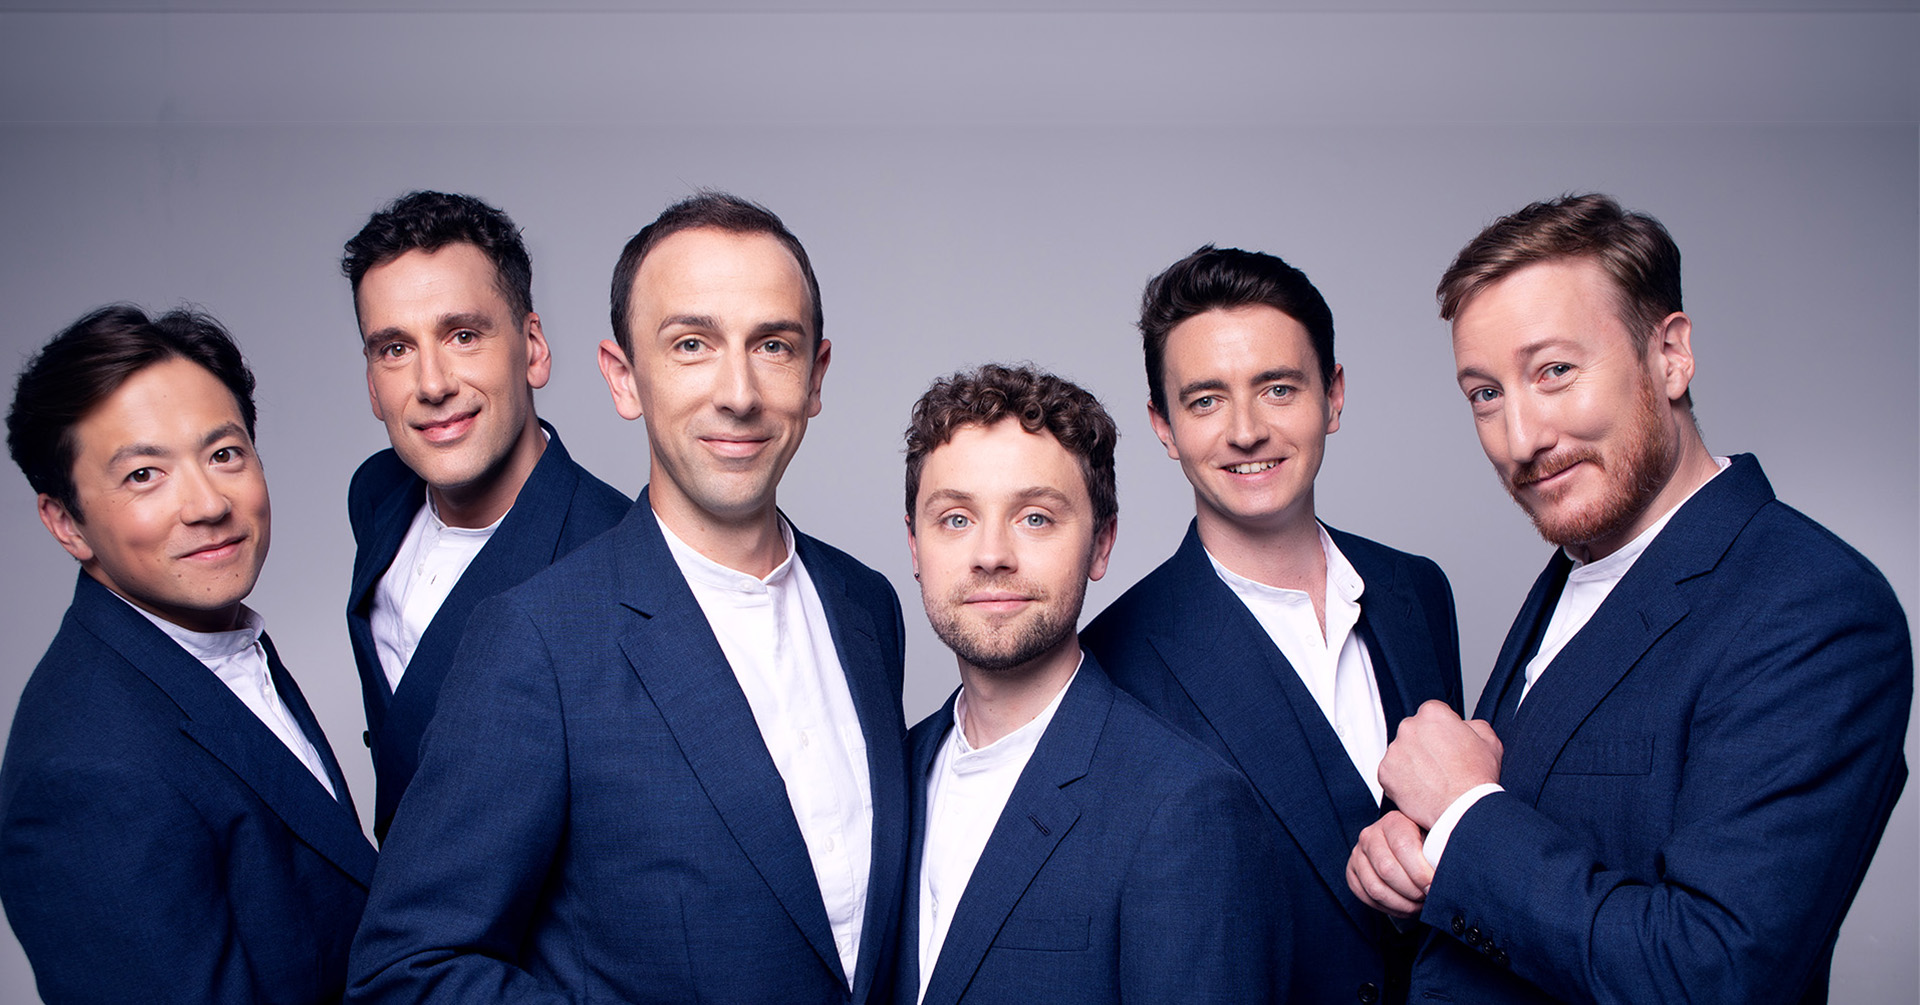 Image of 6 men dressed in suits on a grey background